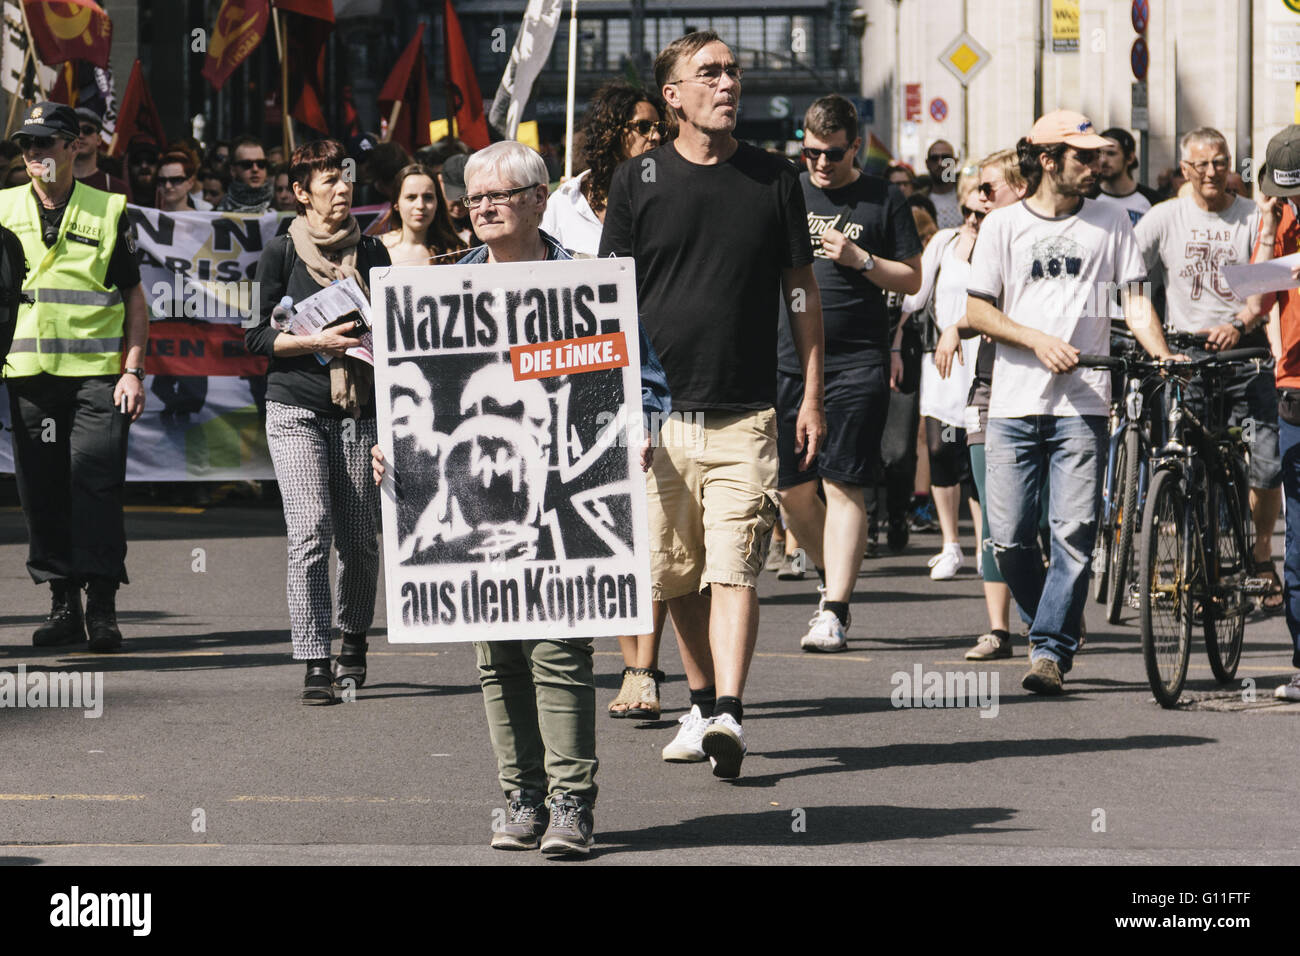 Berlin, Berlin, Germany. 7th May, 2016. 'Nazis out of the minds' A protester holding a sign during counter protests against the rally held under the motto 'Merkel muss weg![Merkel must go]' organised by far-right group 'We for Berlin & We for Germany' Credit:  Jan Scheunert/ZUMA Wire/Alamy Live News Stock Photo